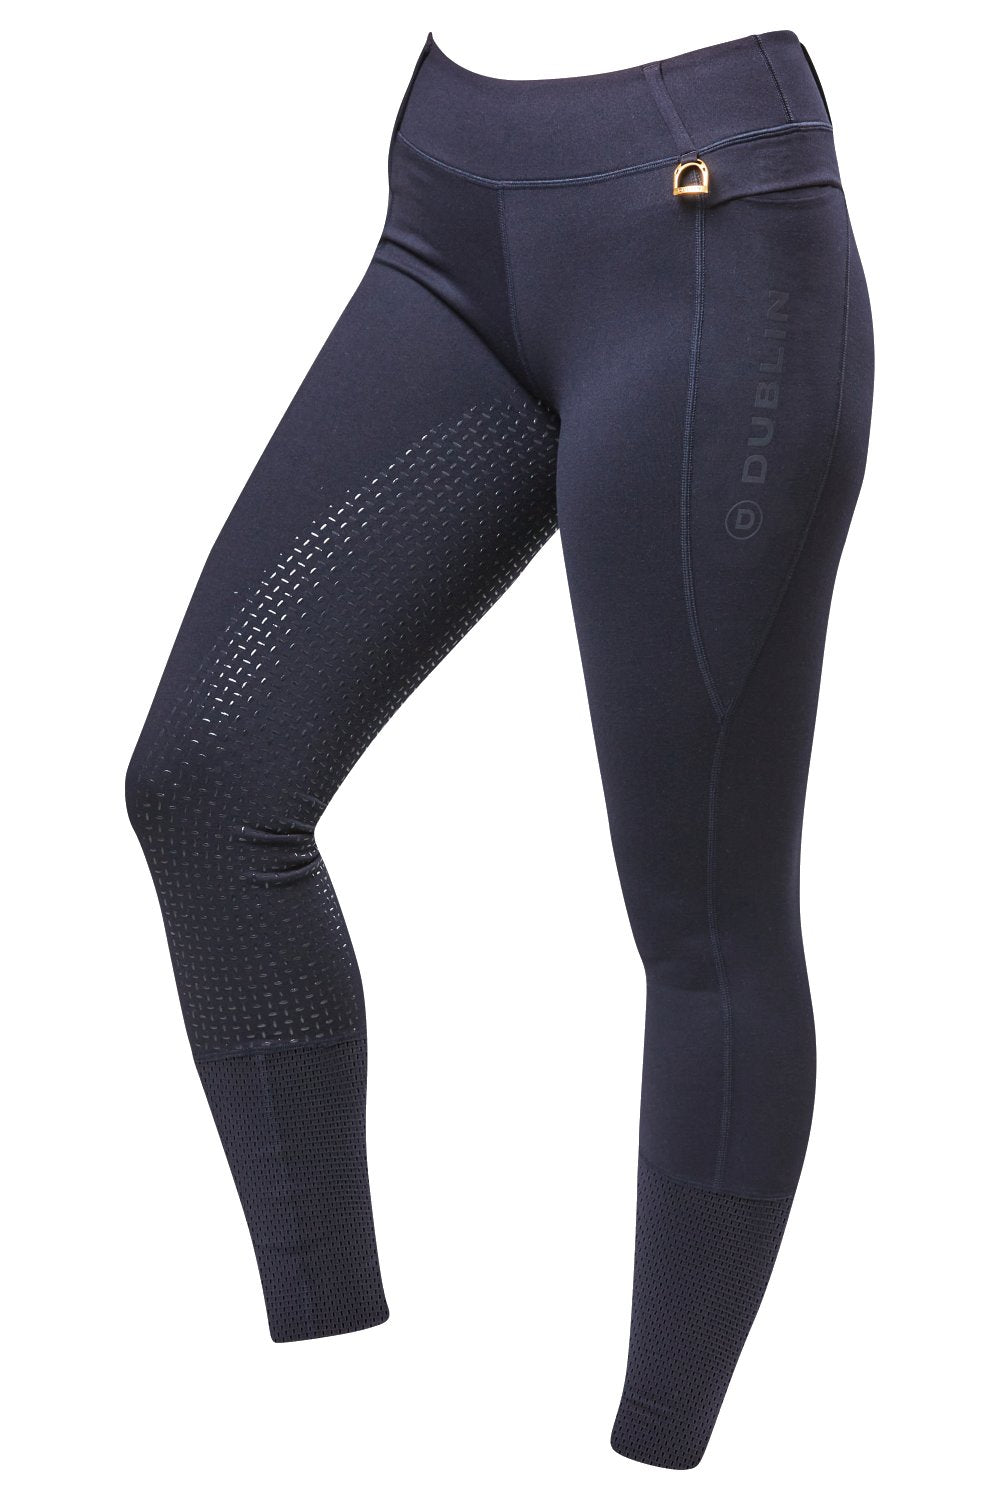 Dublin Cool It Everyday Riding Tights Navy 